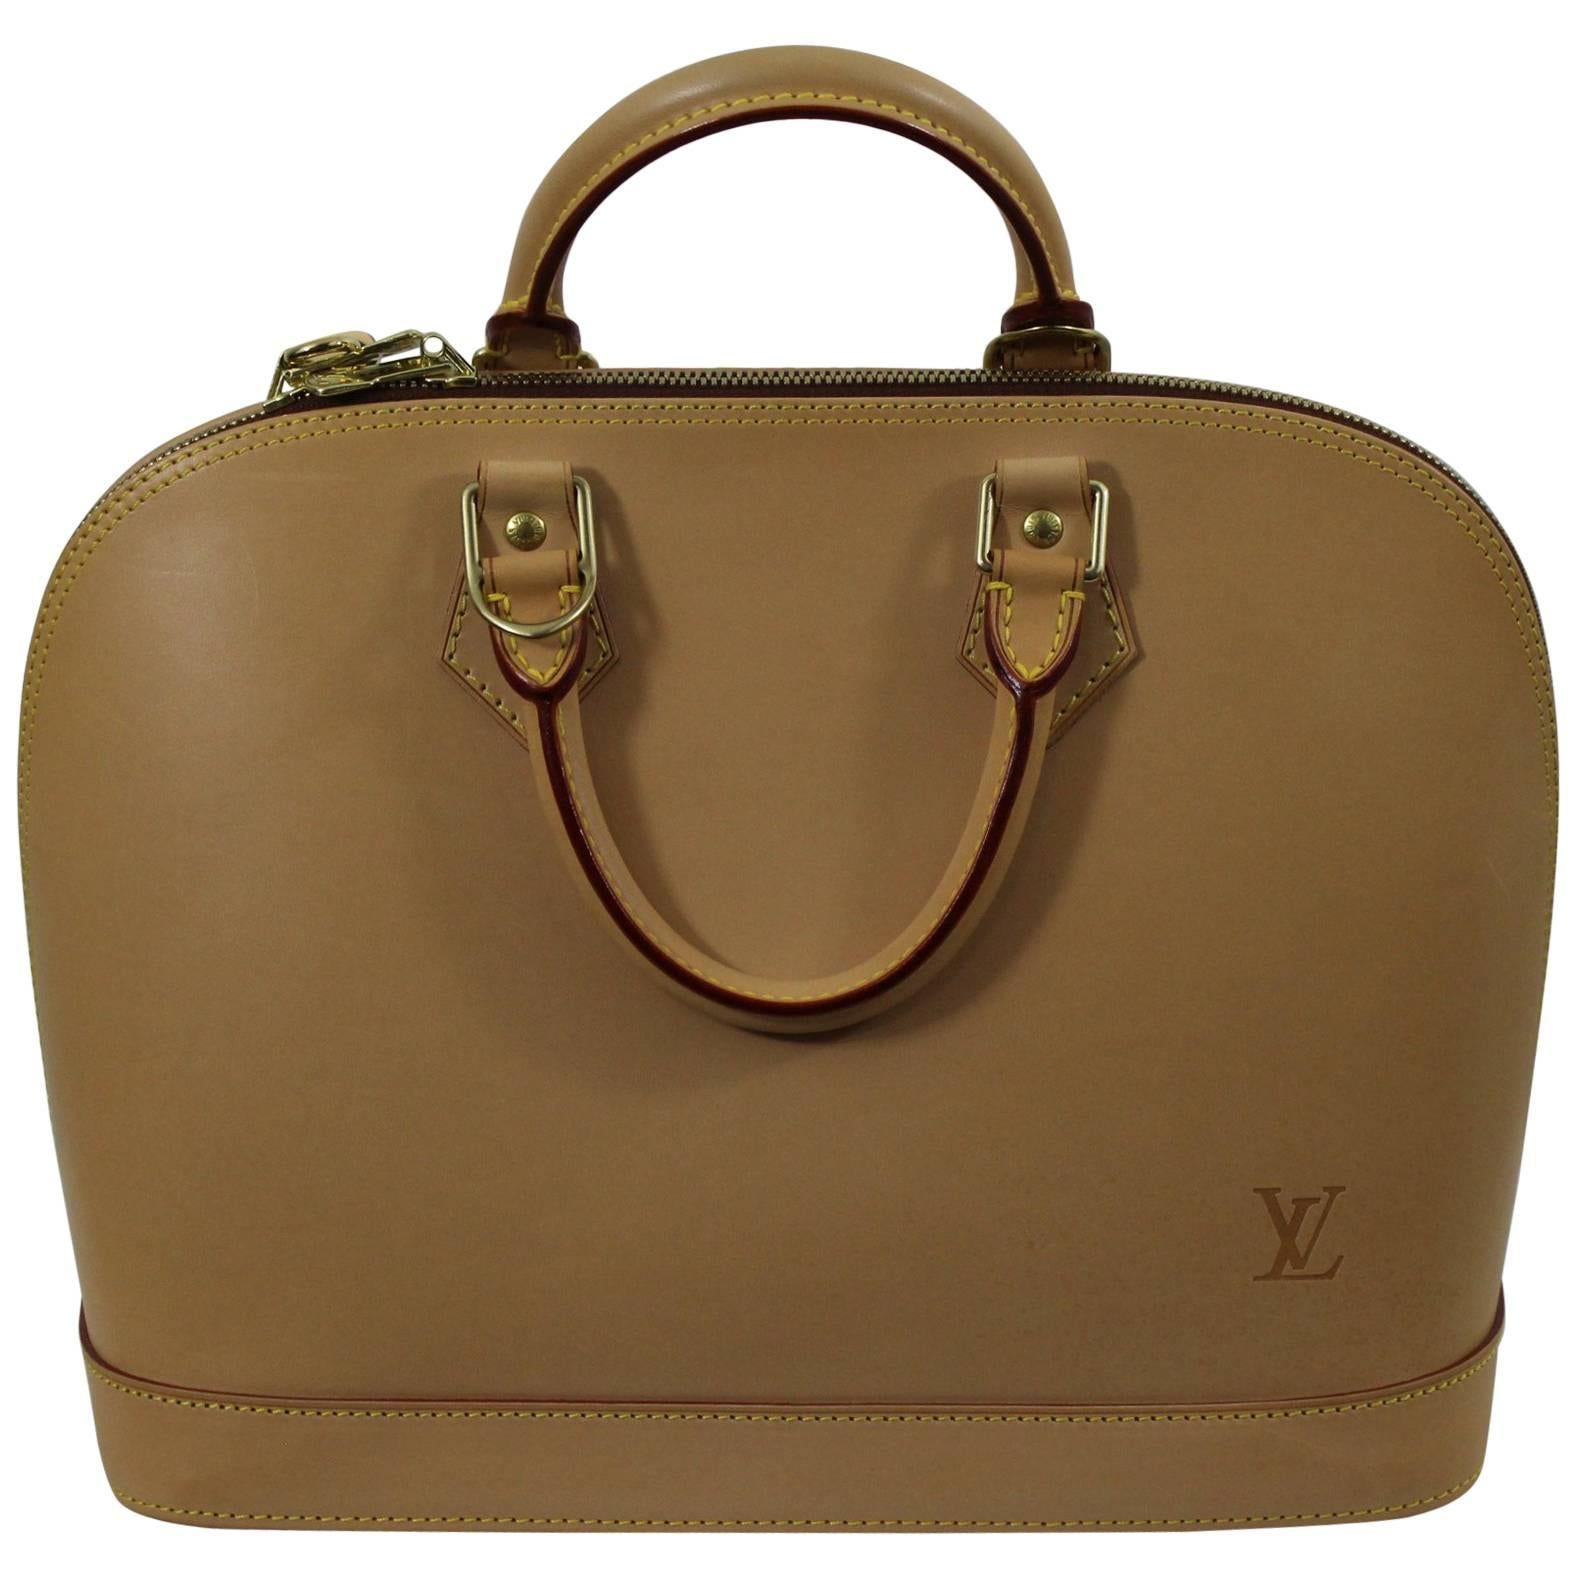 Alma Louis Vuitton Bag all in natural leather.